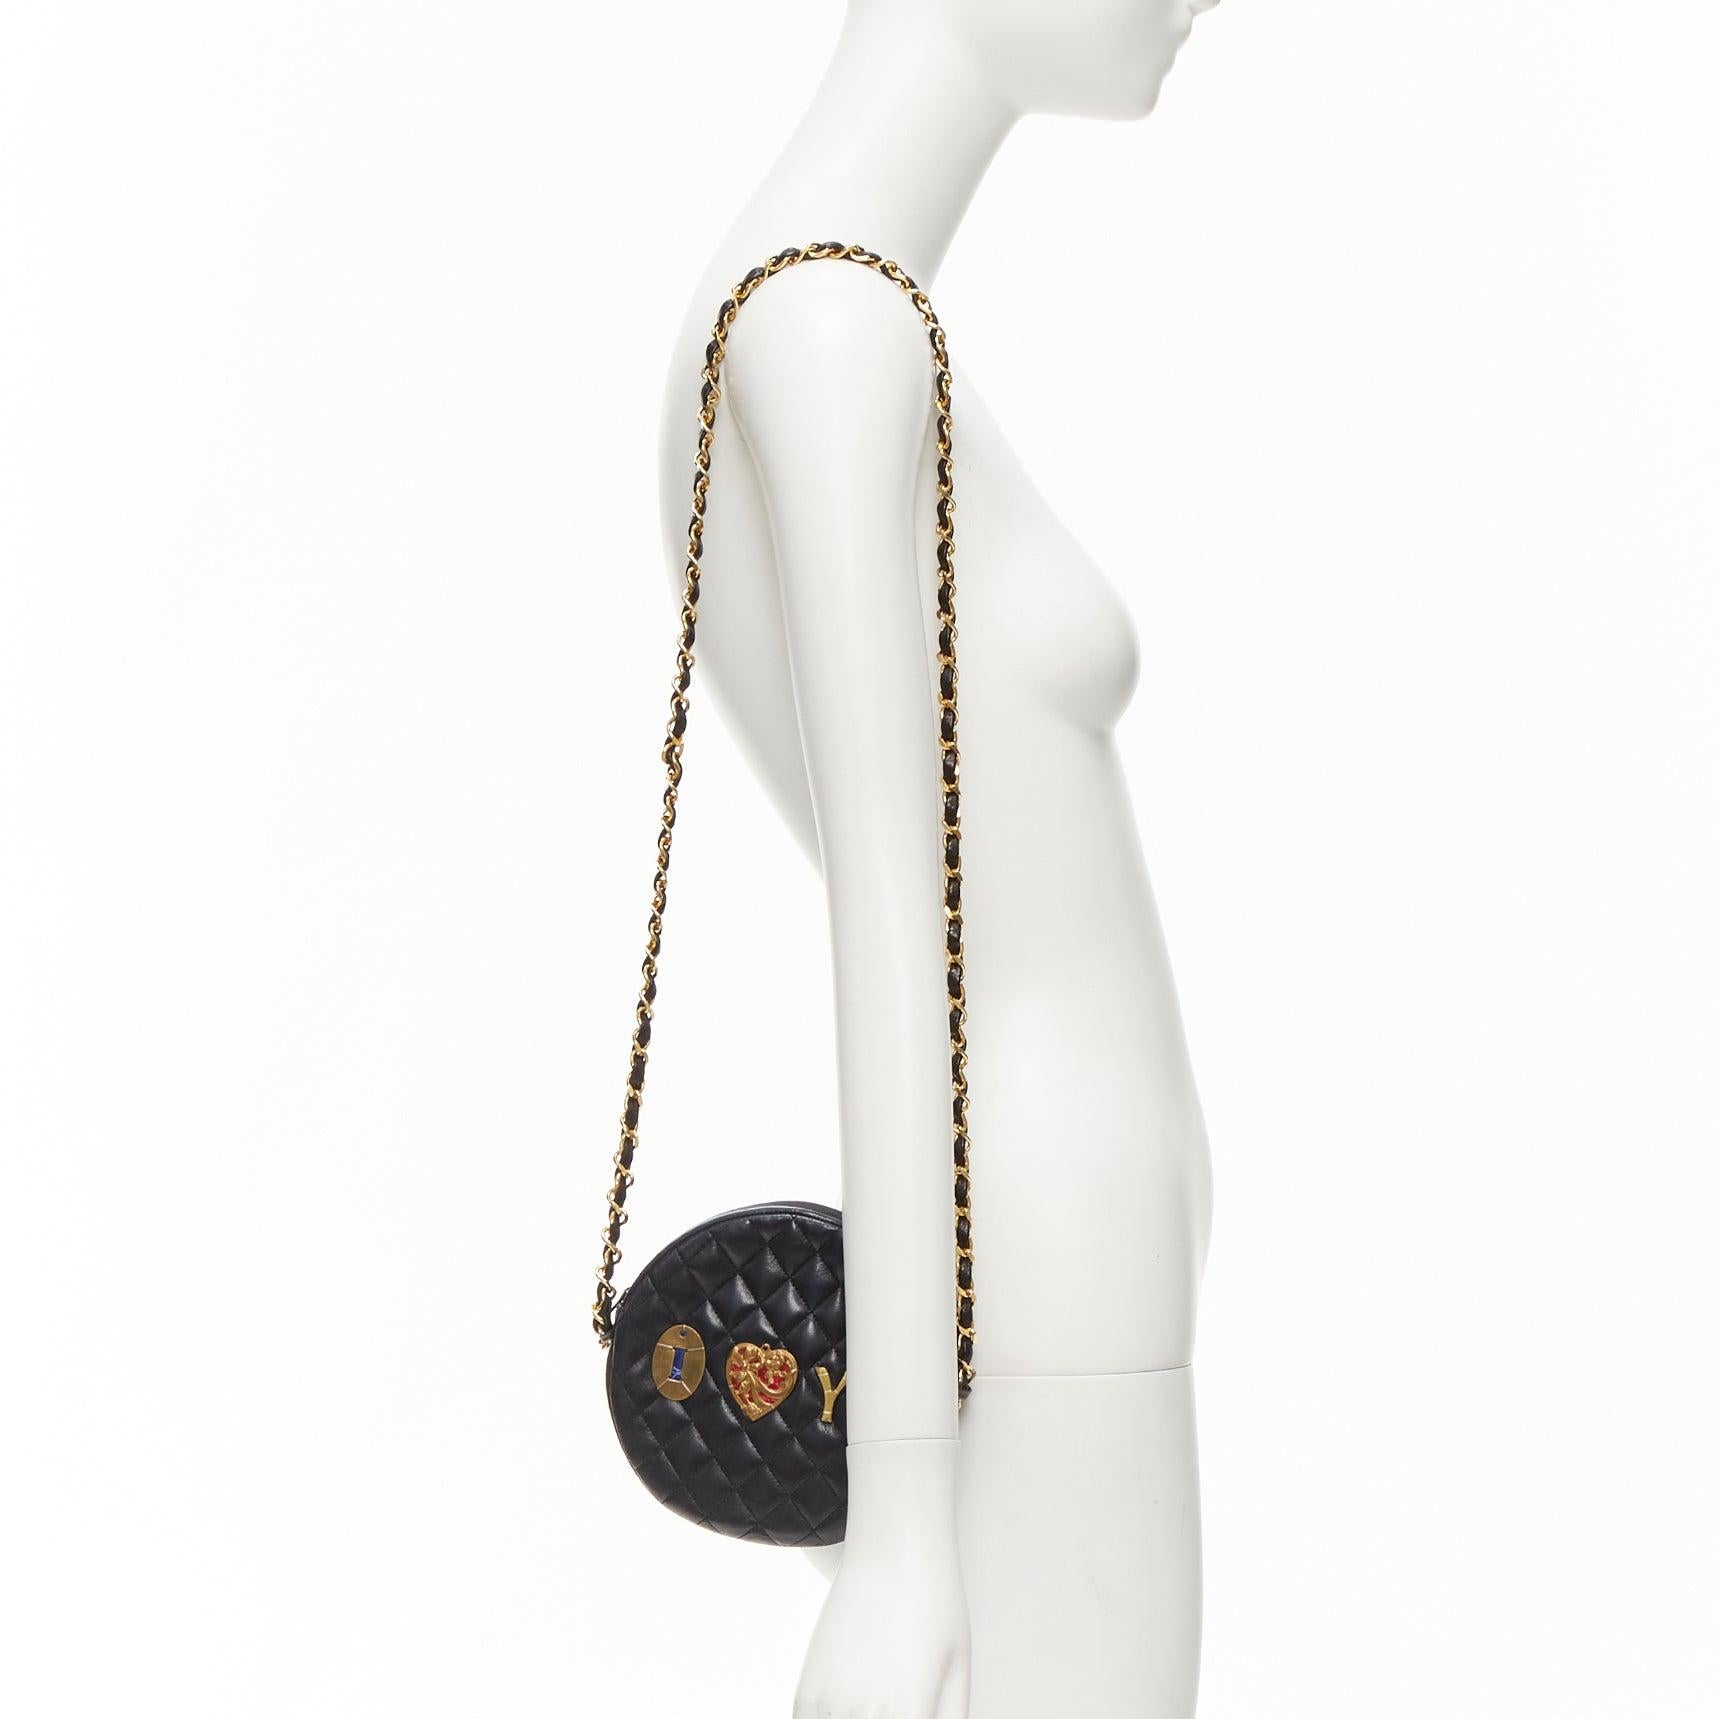 TIGER IN THE RAIN CHANEL Vintage I Love You applique round crossbody chain bag
Reference: NILI/A00052
Brand: Tiger In The Rain
Collection: CHANEL
Material: Leather, Metal
Color: Black, Gold
Pattern: Solid
Closure: Zip
Lining: Red Leather
Extra